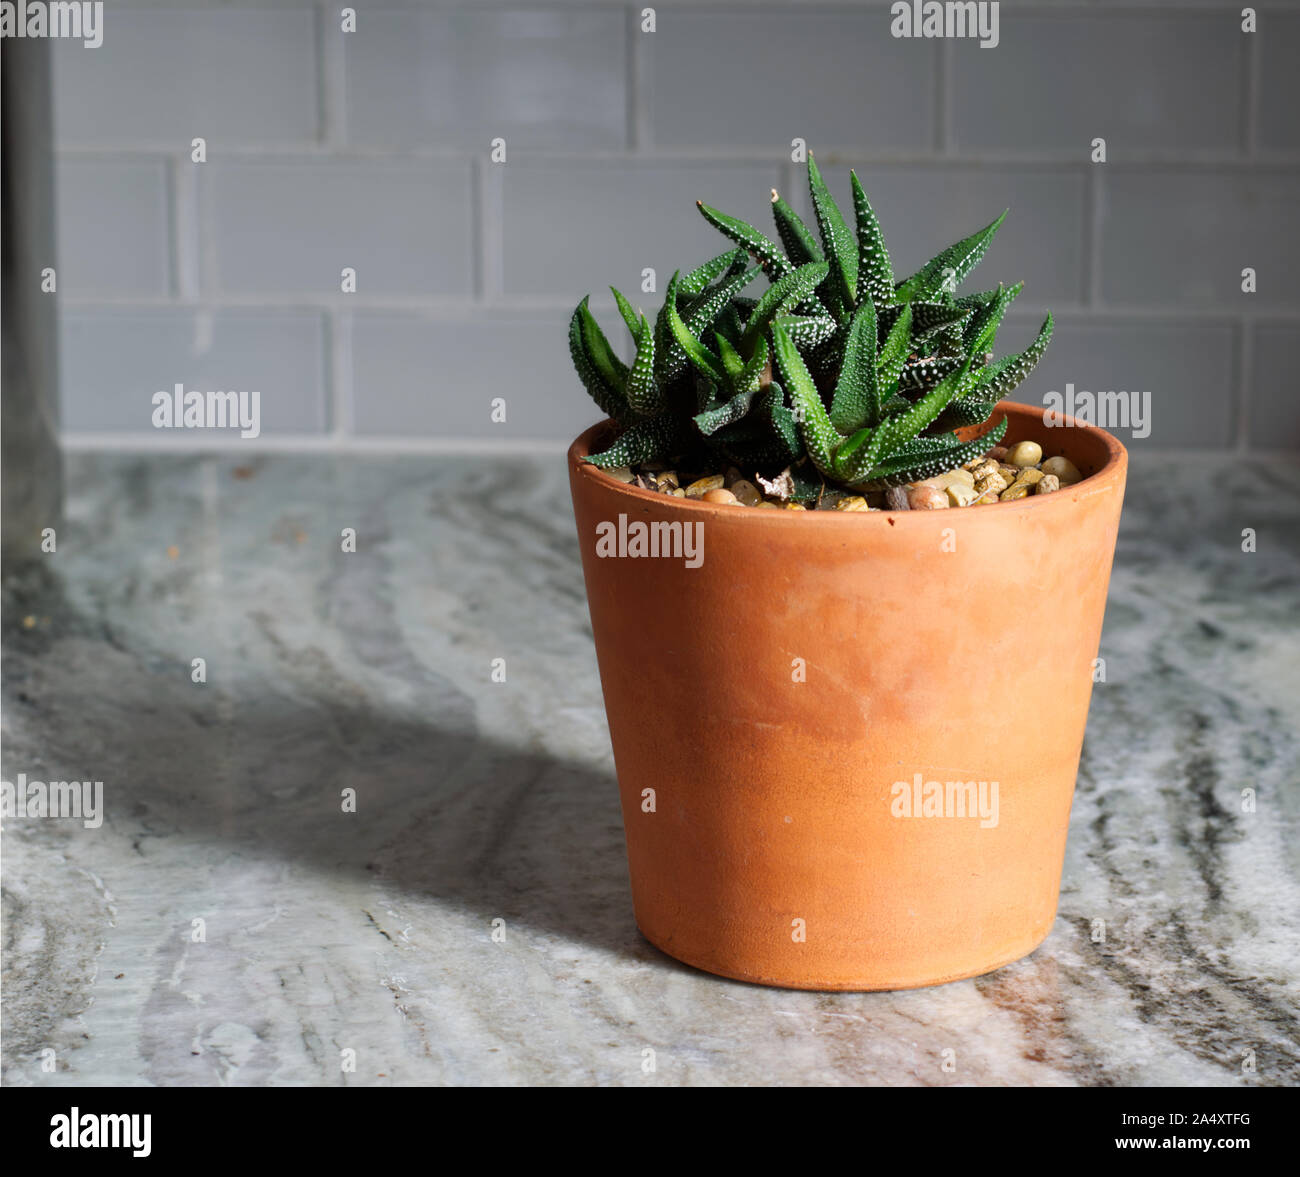 Potted succulent with bright green leaves and white spots on a marble countertop with backsplash. Stock Photo